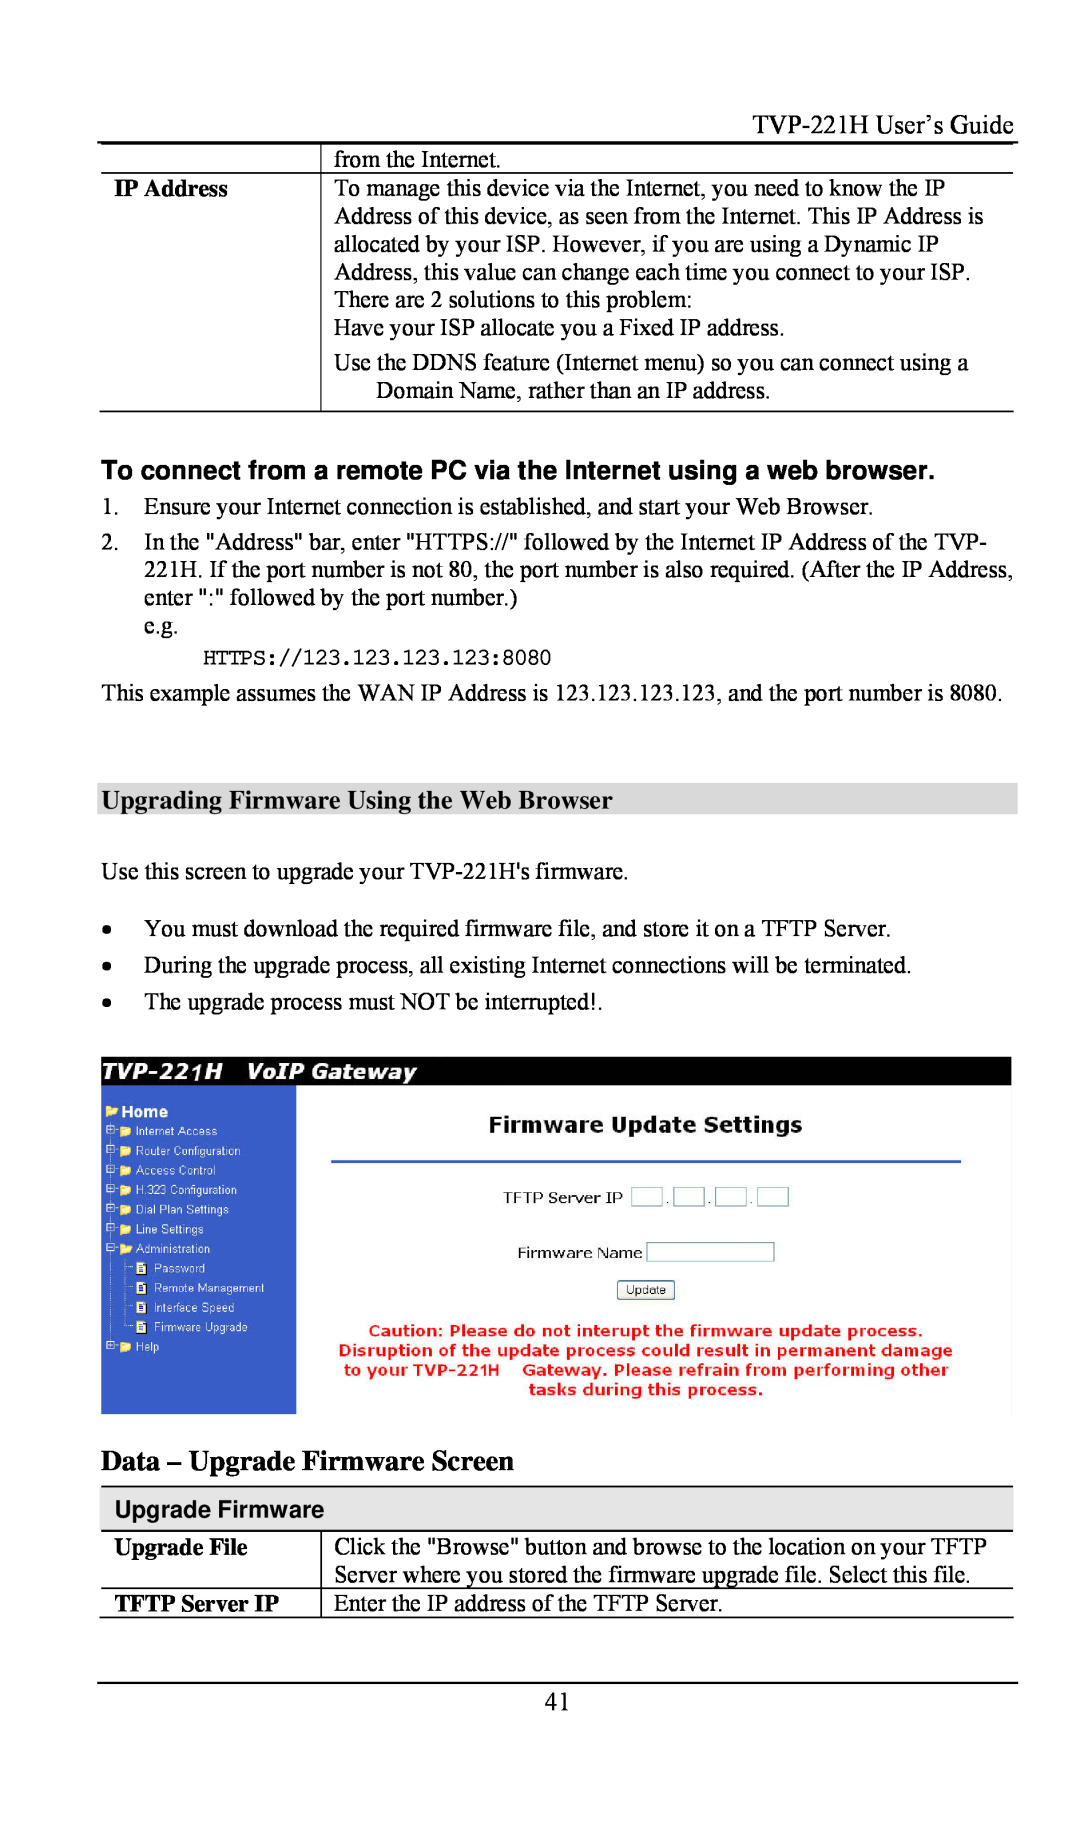 TRENDnet VoIP Gateway Data - Upgrade Firmware Screen, To connect from a remote PC via the Internet using a web browser 